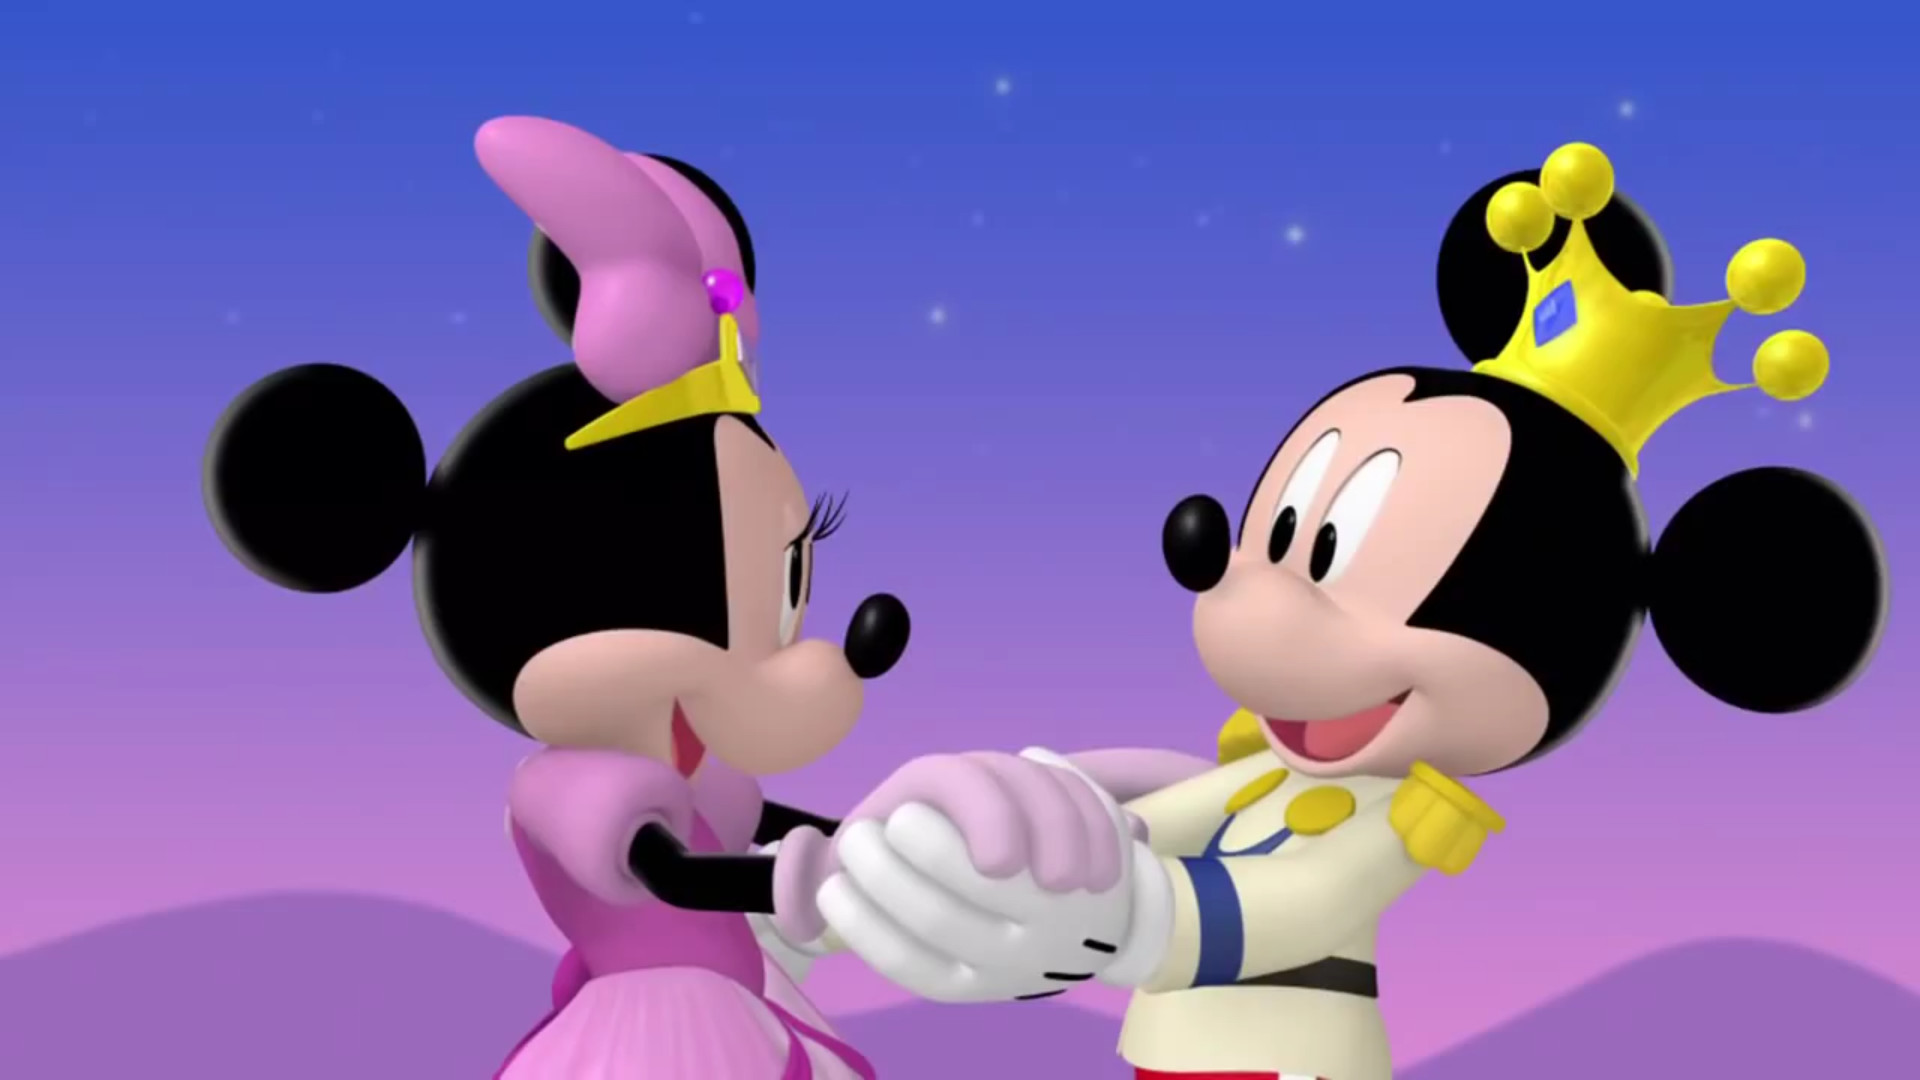 Mickey Mouse Clubhouse Images Minnie Rella Hd Wallpaper - Minnie Mouse Mickey Mouse Clubhouse Full Episodes - HD Wallpaper 